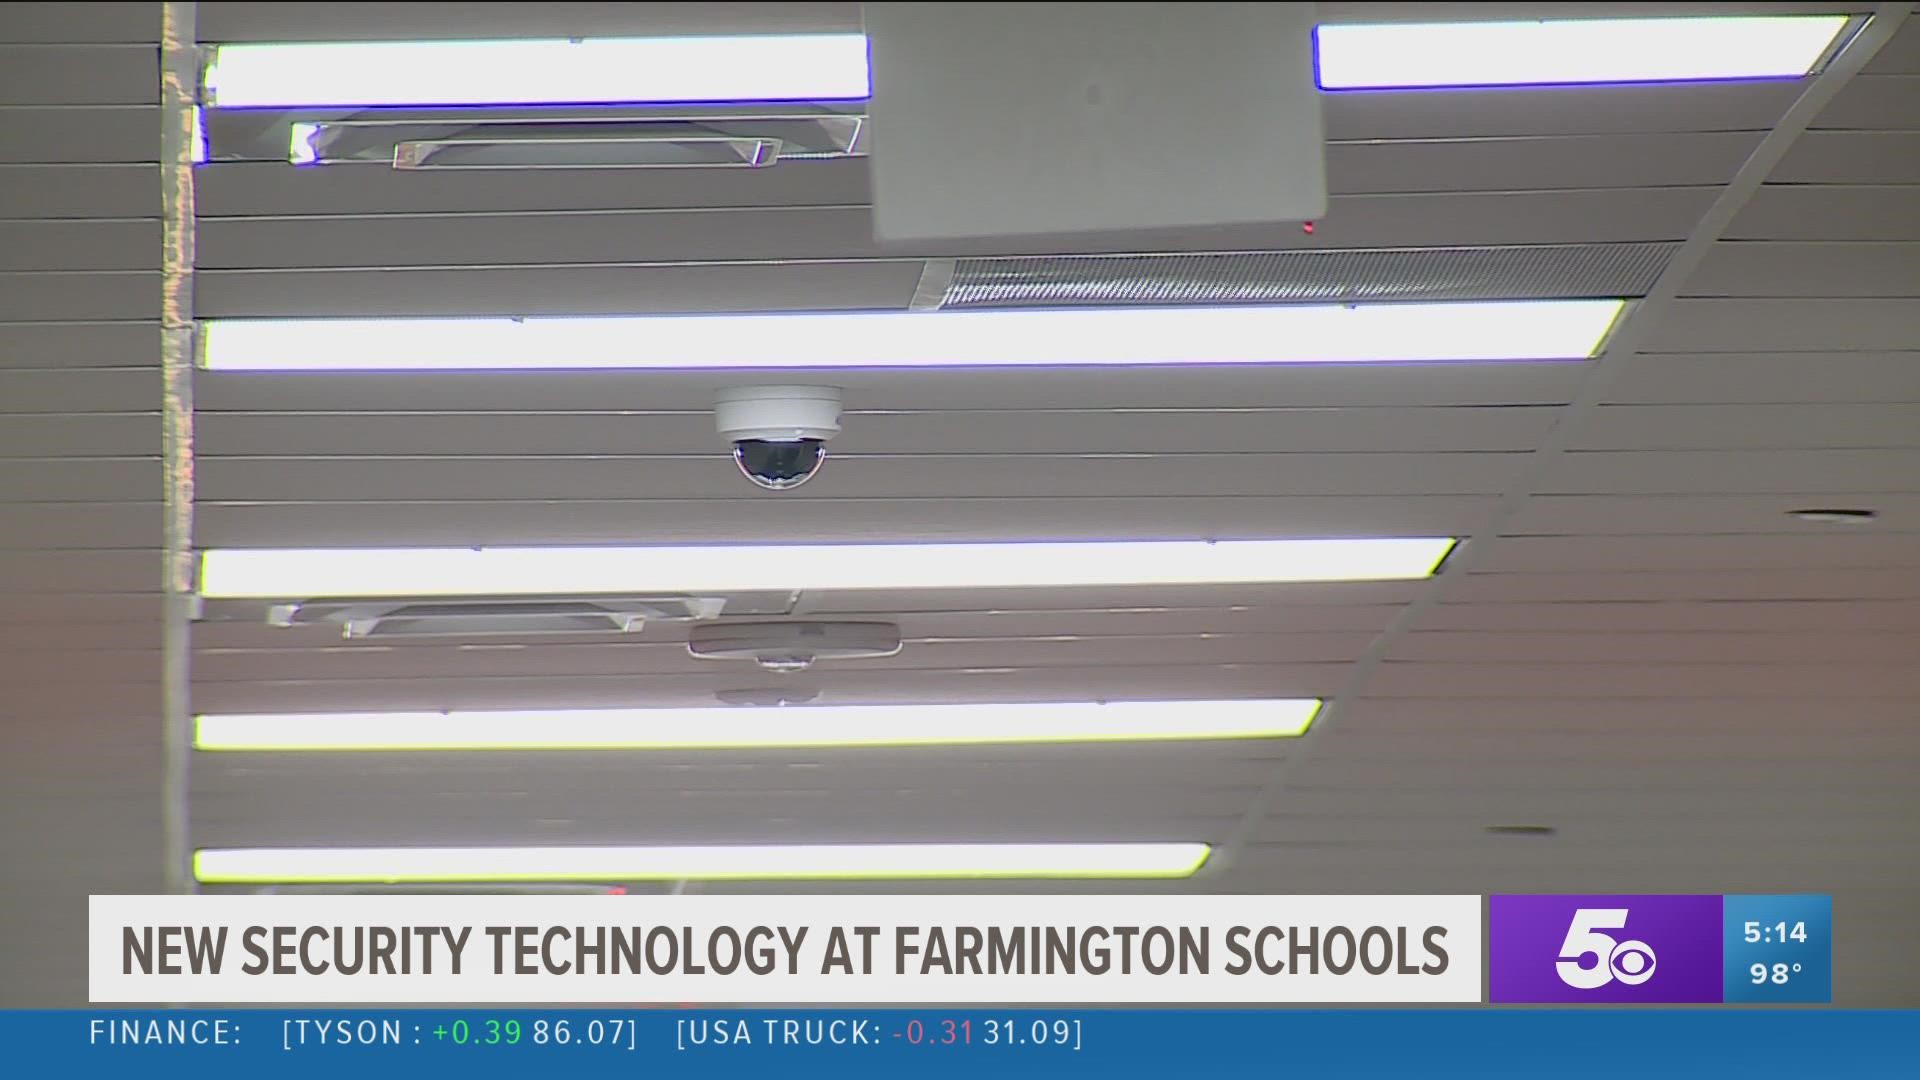 Farmington Schools are adding Verkada cameras that record 24/7 and have infrared sensors that measure chemicals in the air and noise levels.